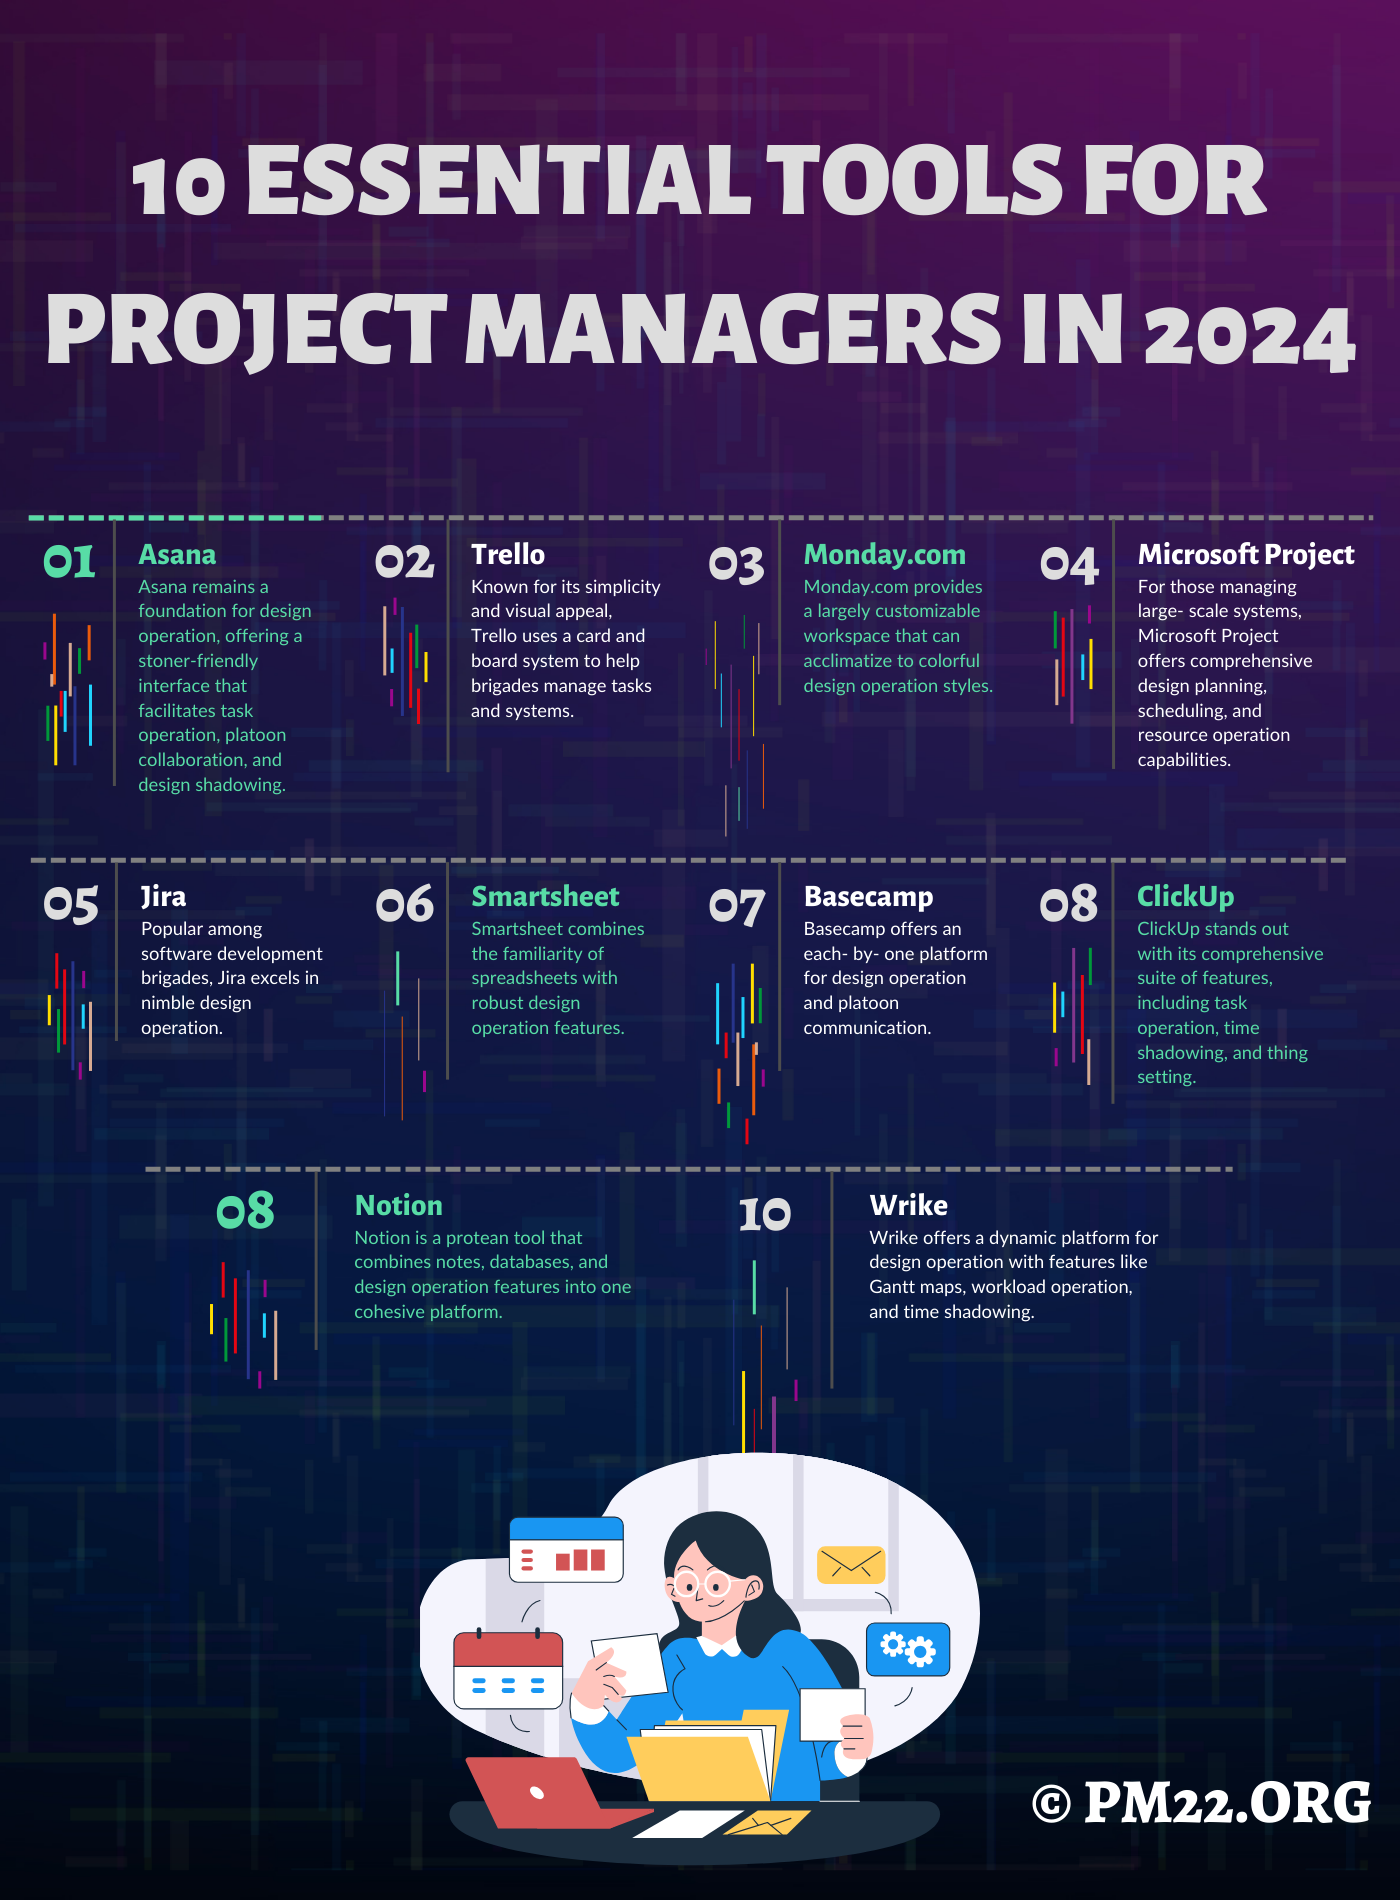 10 Essential Tools for Project Managers in 2024